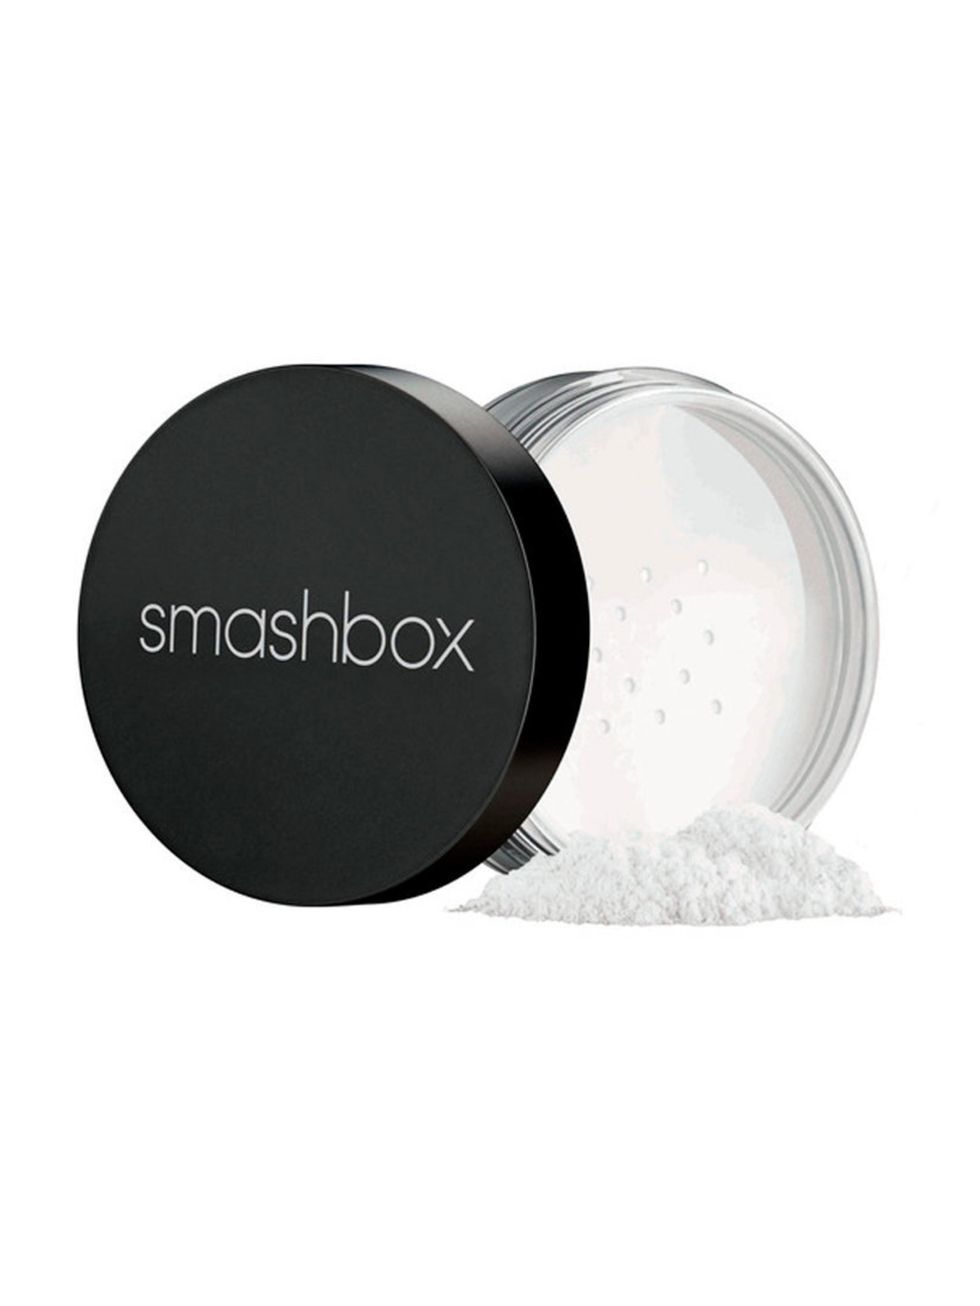 &lt;p&gt;Use a light translucent powder across your T-zone if you&#039;re prone to excess oil (read: shine).&lt;/p&gt;&lt;p&gt;&lt;a href=&quot;http://www.smashbox.co.uk/product/6032/22770/Face/PHOTO-SET-FINISHING-POWDER/index.tmpl&quot;&gt;ELLE loves Sma